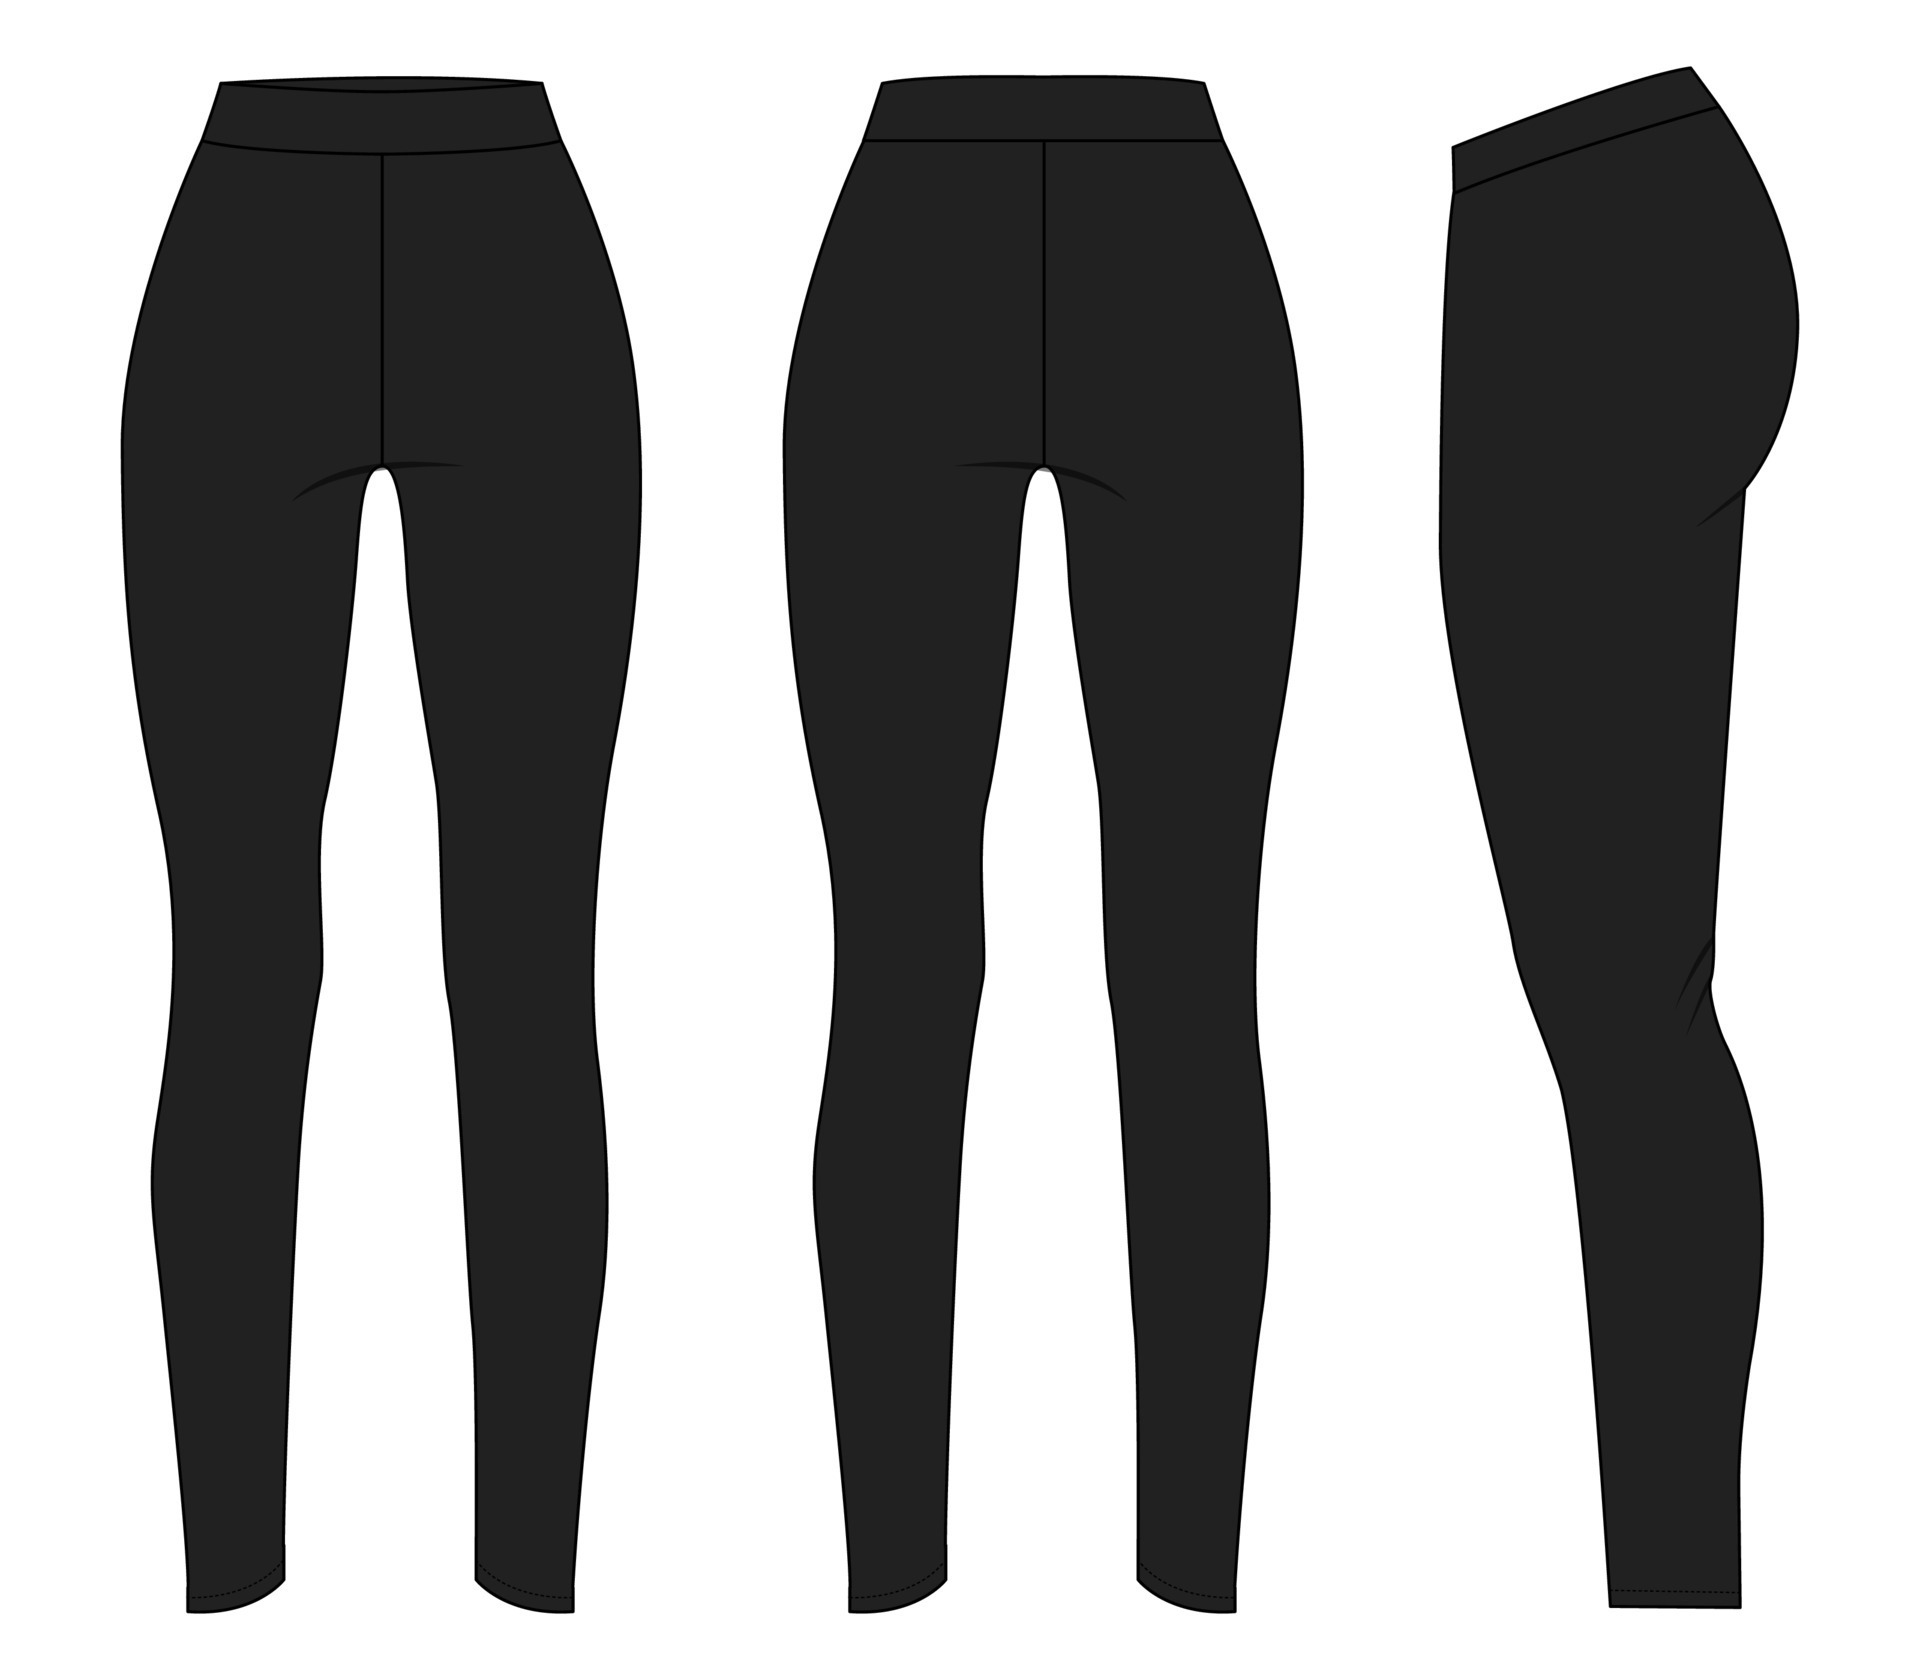 https://static.vecteezy.com/system/resources/previews/008/162/511/original/leggings-technical-fashion-flat-sketch-illustration-black-color-template-for-ladies-free-vector.jpg